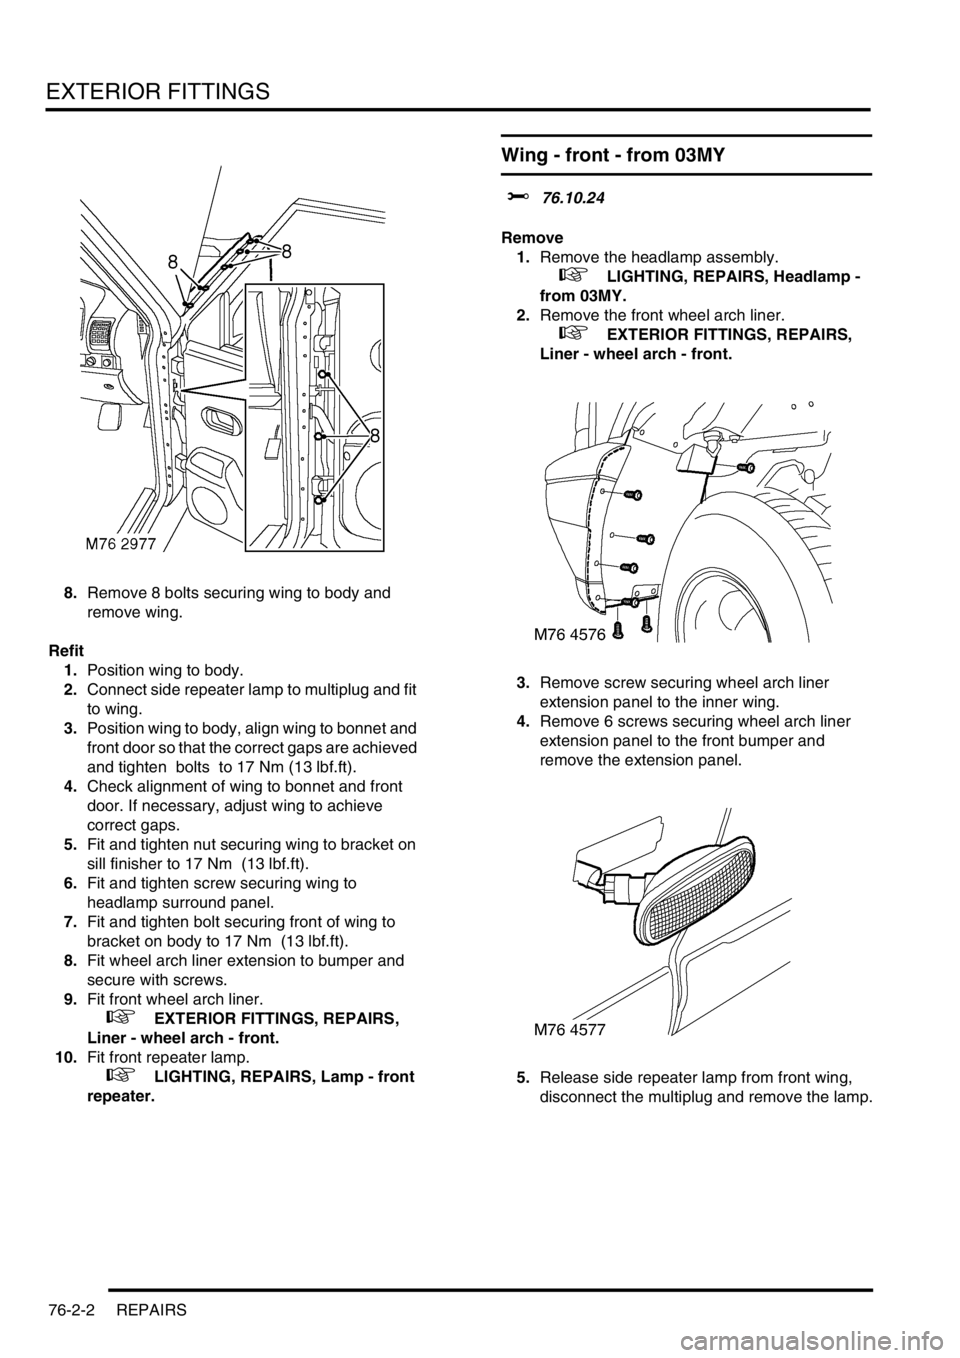 LAND ROVER DISCOVERY 2002 Owners Manual EXTERIOR FITTINGS
76-2-2 REPAIRS
8.Remove 8 bolts securing wing to body and 
remove wing. 
Refit
1.Position wing to body.
2.Connect side repeater lamp to multiplug and fit 
to wing.
3.Position wing to